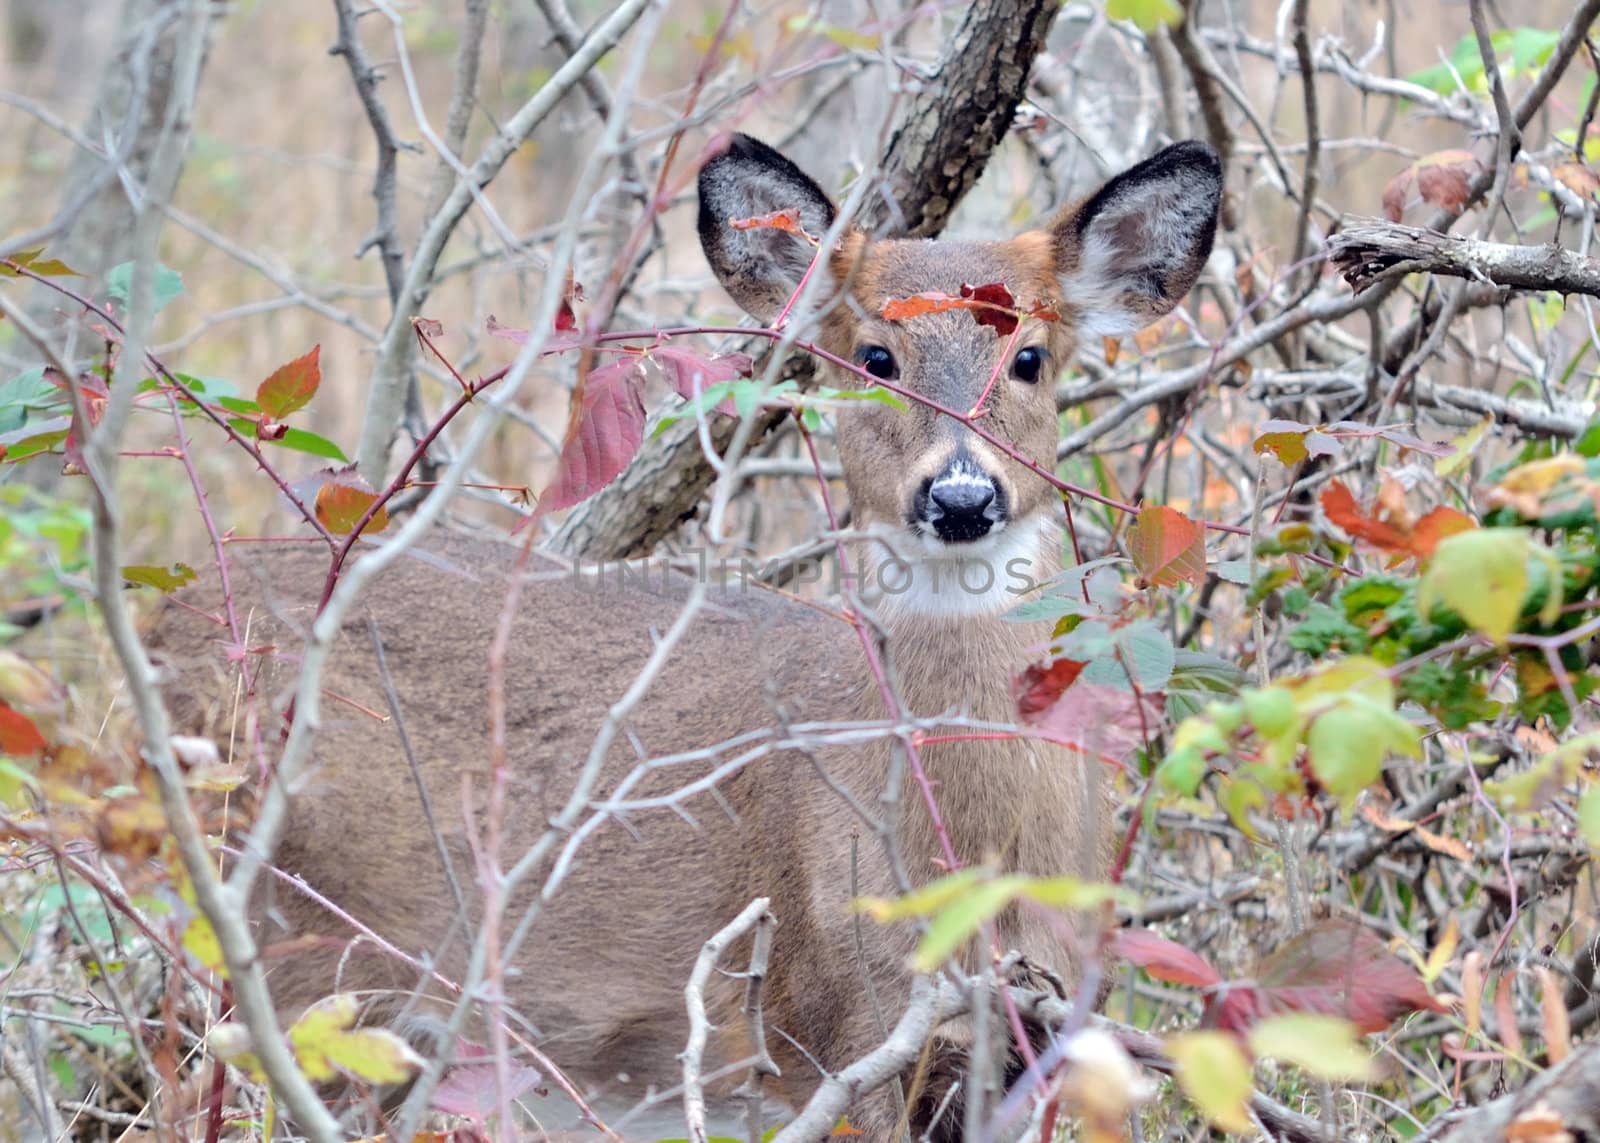 Whitetail deer yearling standing in a thicket.